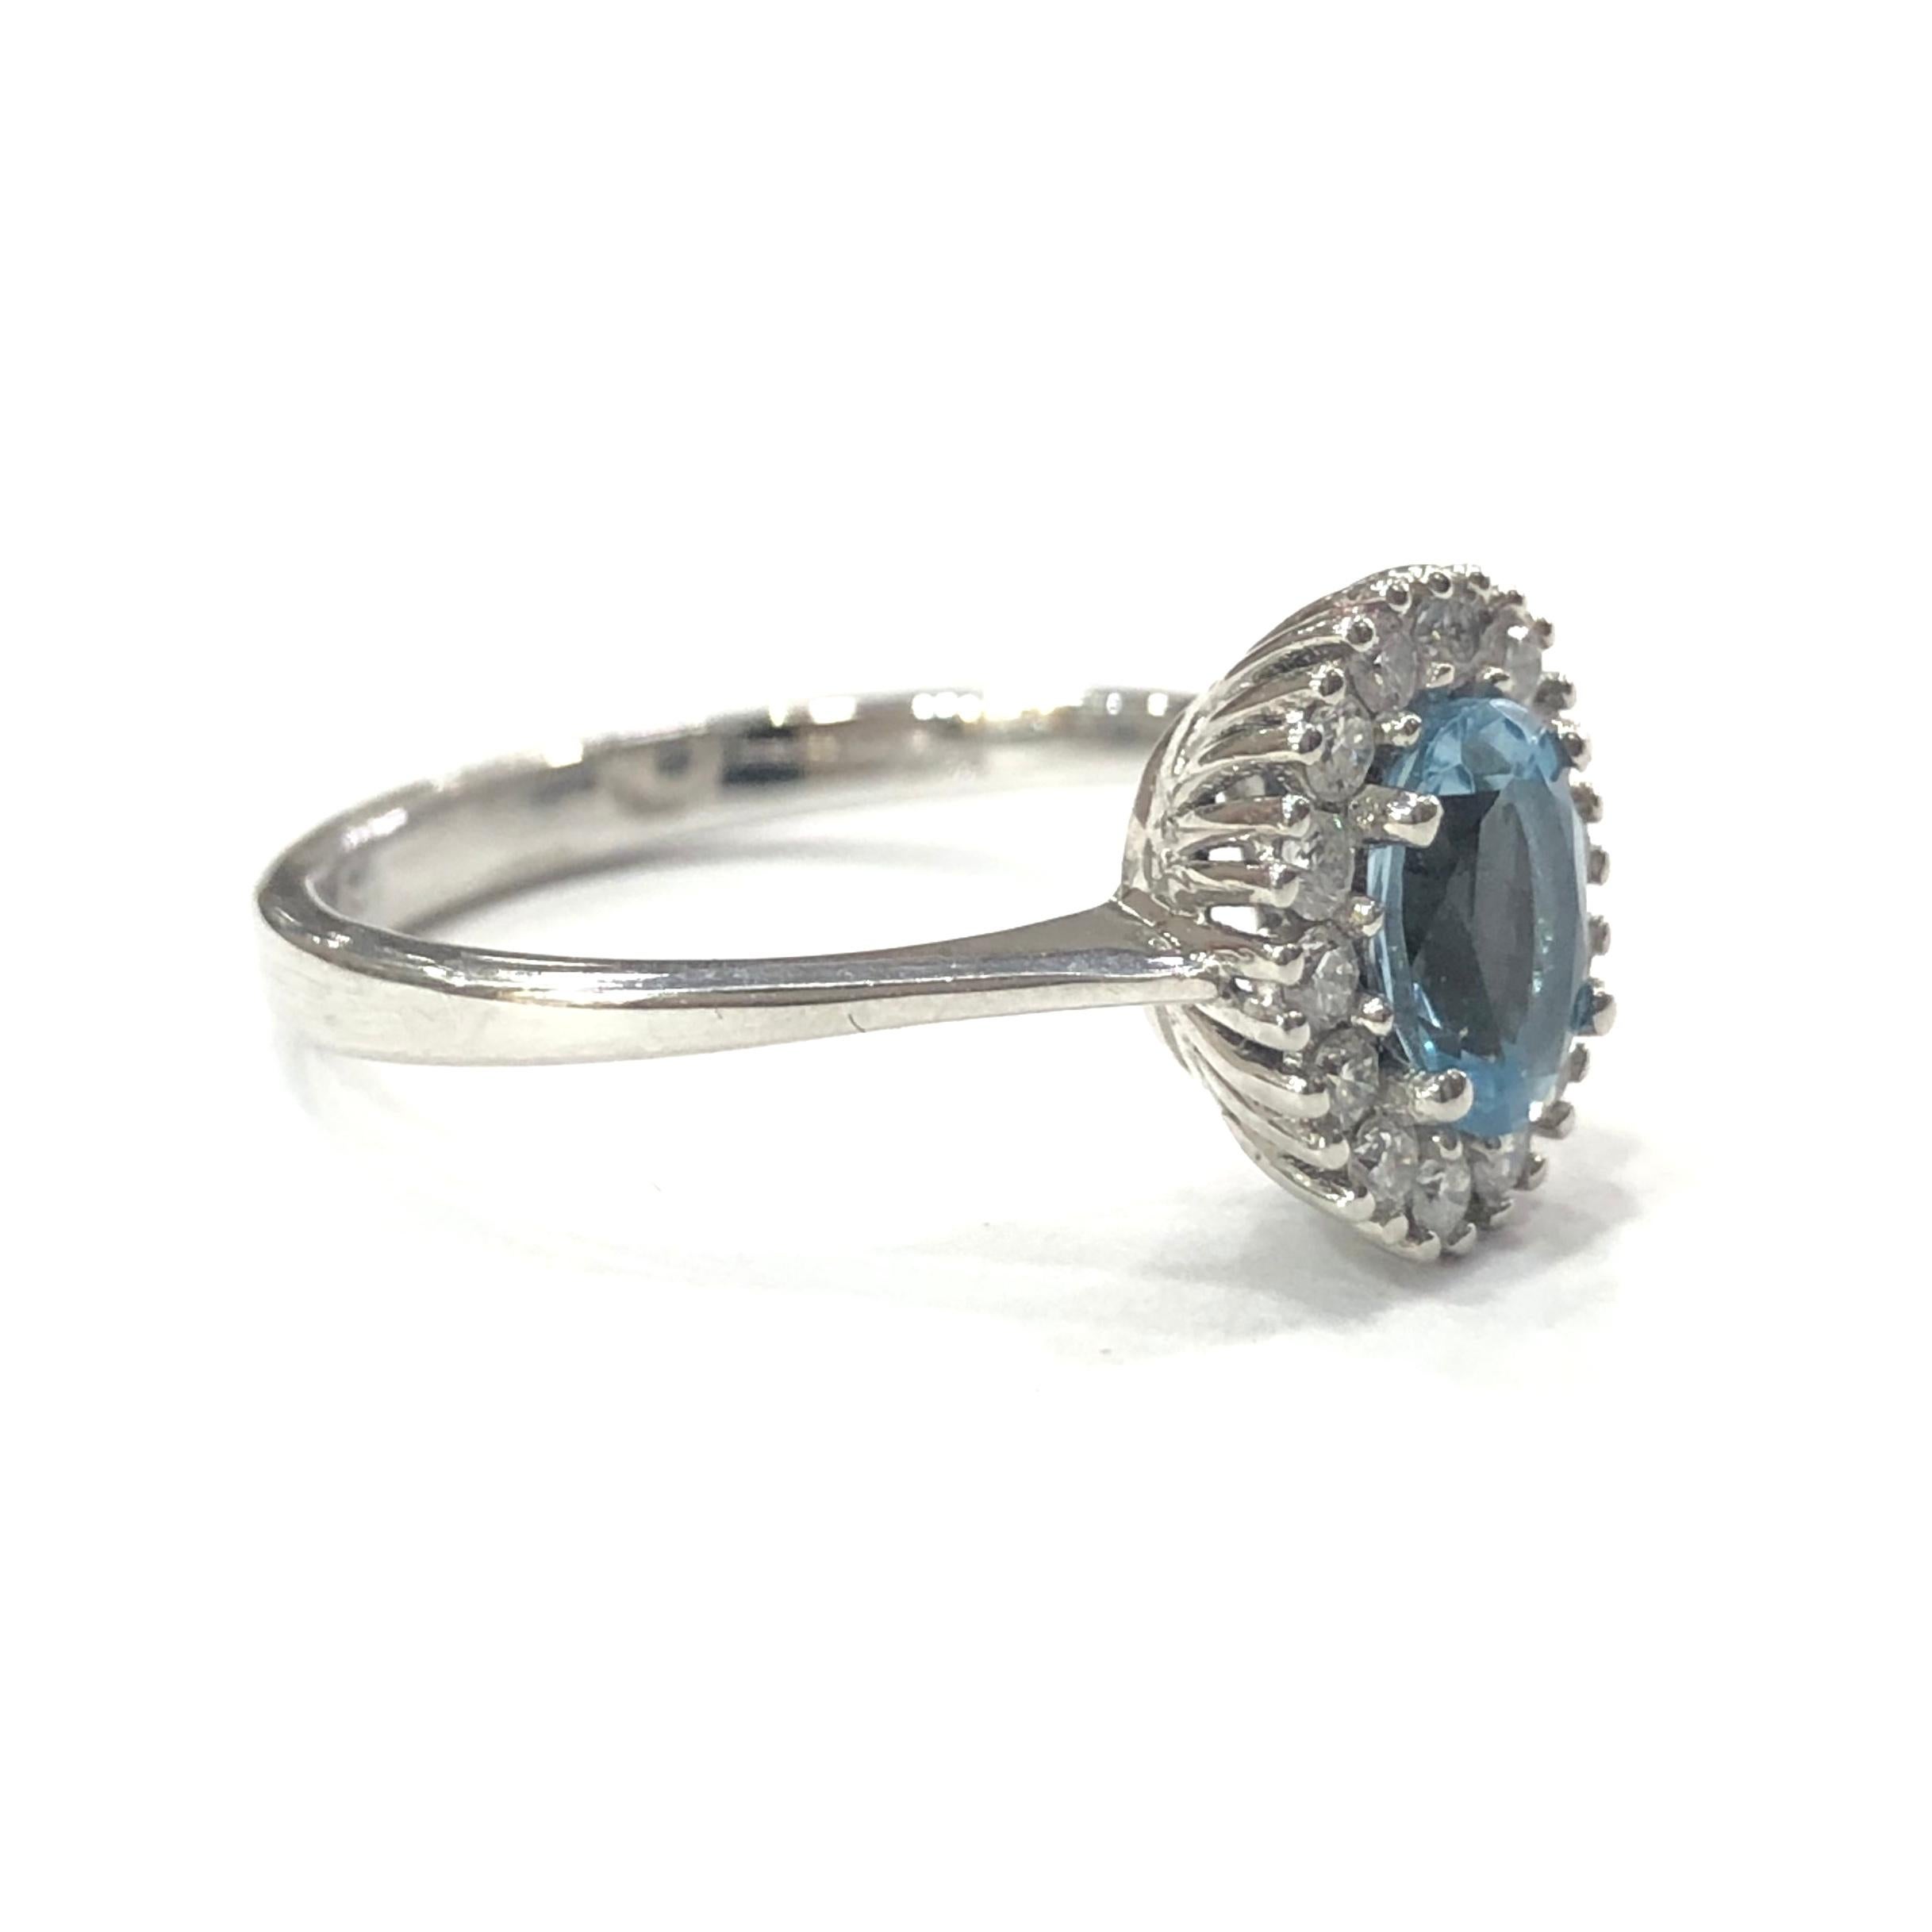 18ct White Gold Aquamarine and Diamond Cluster Ring. Set with a central oval Aquamarine set in a four claw setting, surrounded by 14 round brilliant cut Diamonds.
With a full english hallmark.

Approximate Aquamarine weight : 0.75ct
Approximate